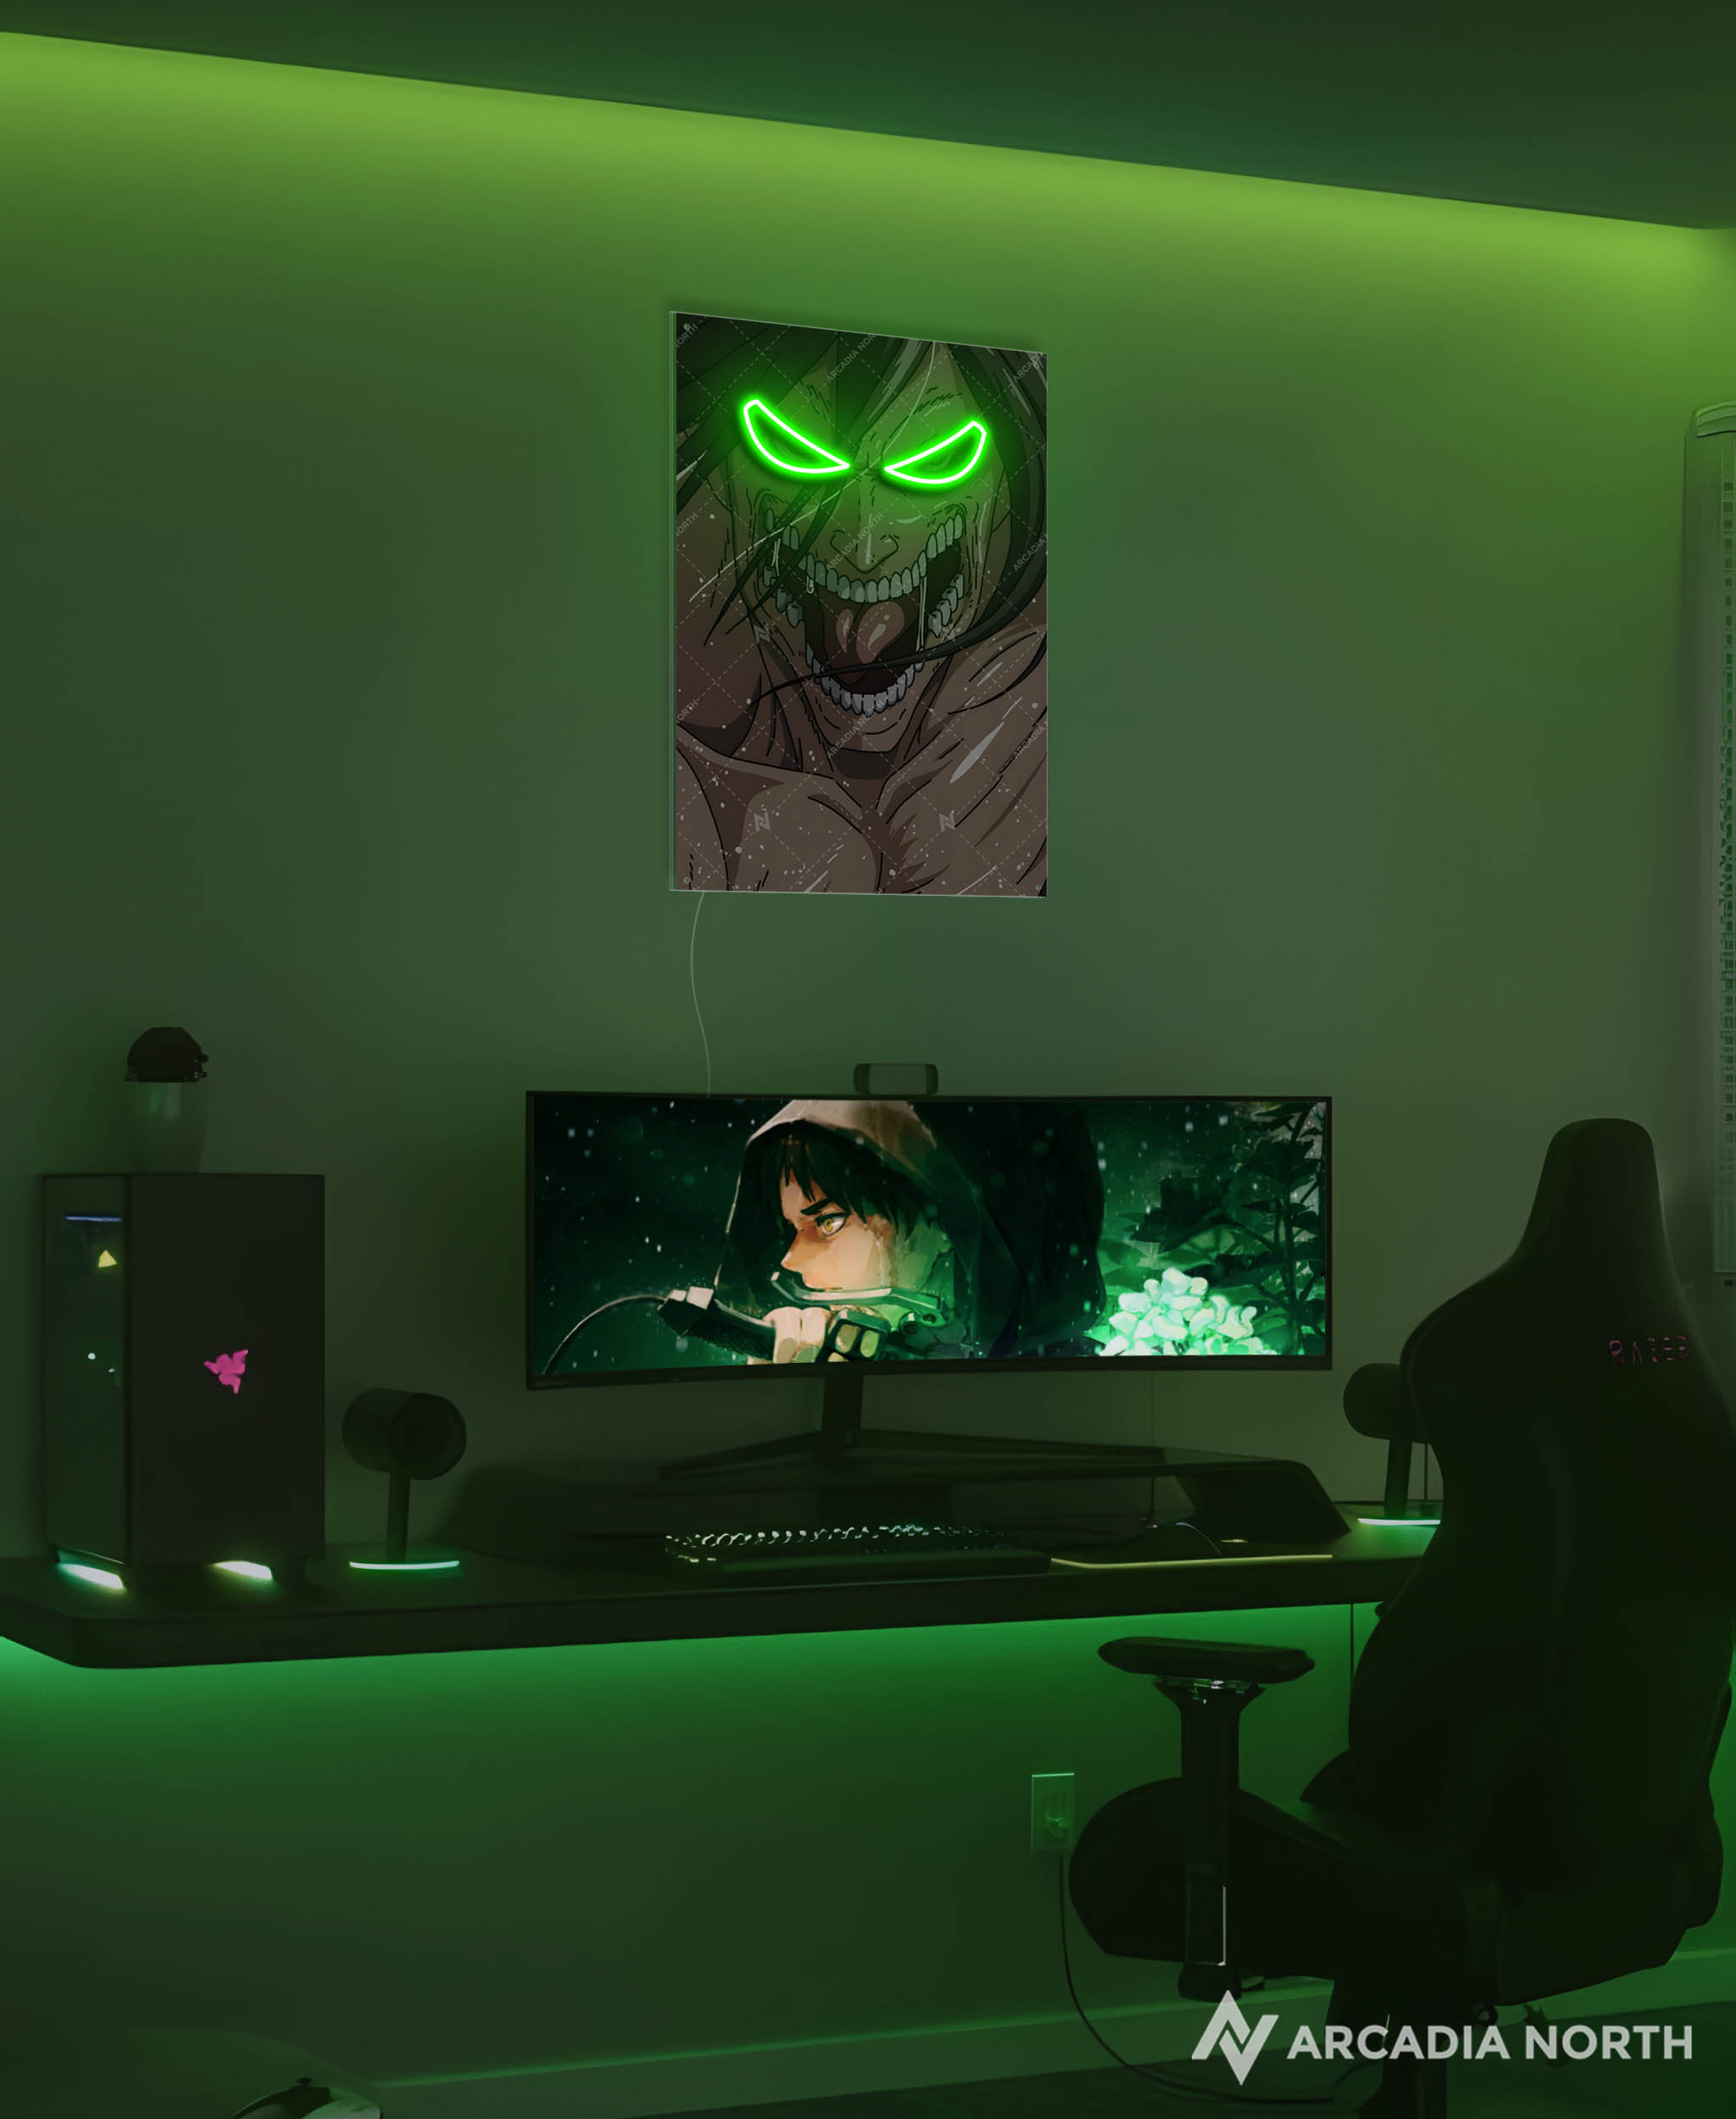 Arcadia North AURALIGHT - an LED Poster featuring the anime Attack on Titan with Eren as the Attack TItan with glowing green eyes. Illuminated by glowing neon LED lights. UV-printed on acrylic.